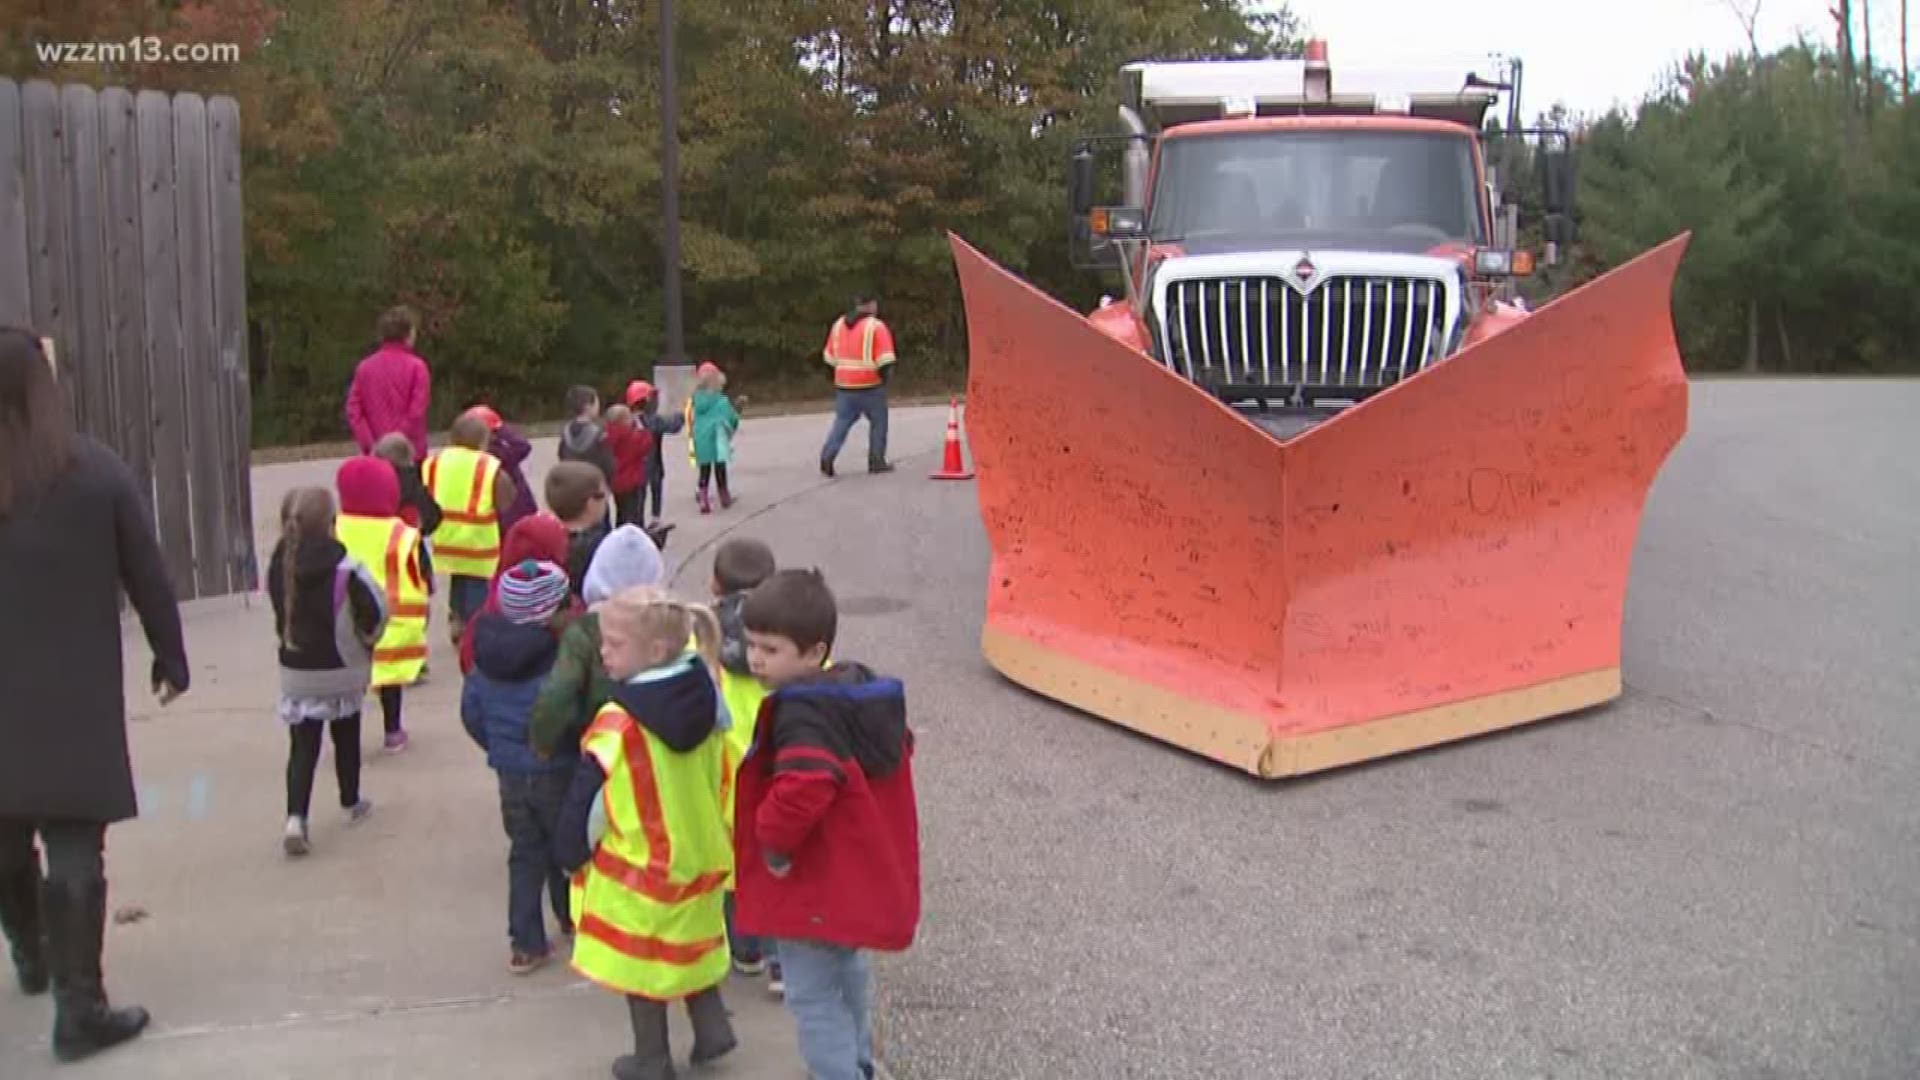 Snow plow drivers ask children to 'Play it Safe' this winter